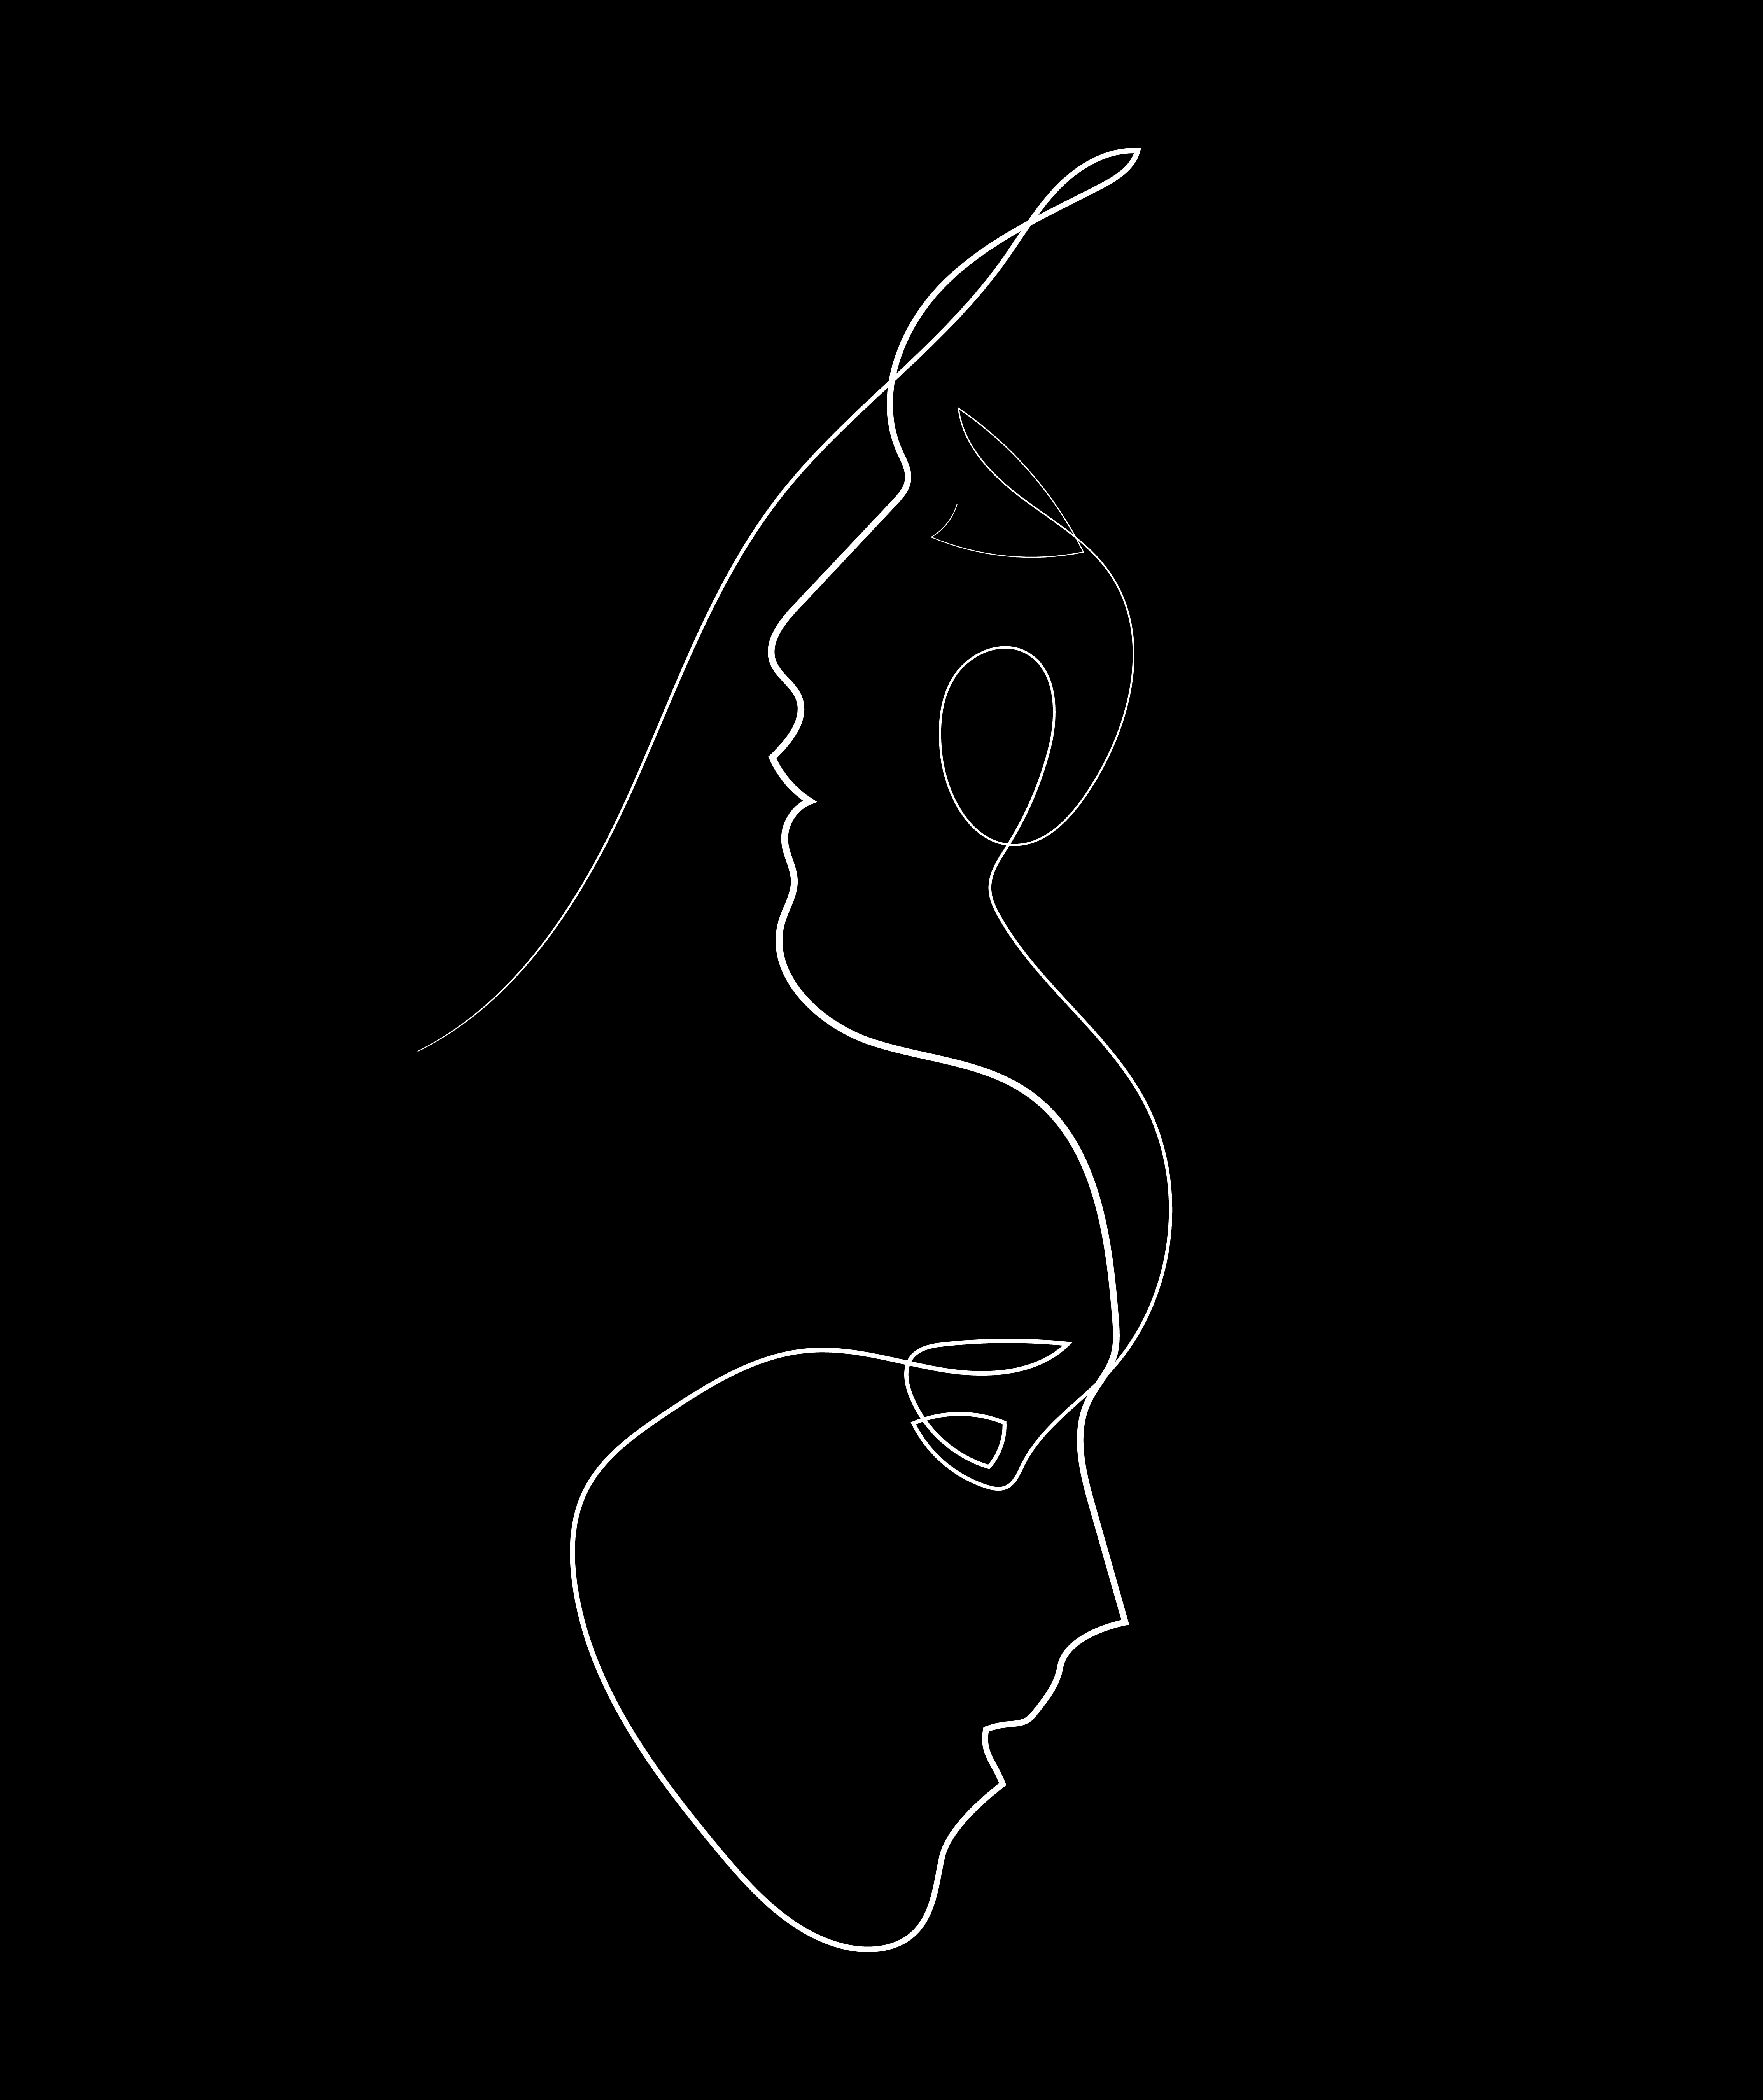 Modern Abstract Line Drawing Art Print Wall Poster - Woman's Face Portrait  with Flowers - UNFRAMED - Minimalist One Line Artwork for Living Room,  Bedroom, Bathroom Home Office (11